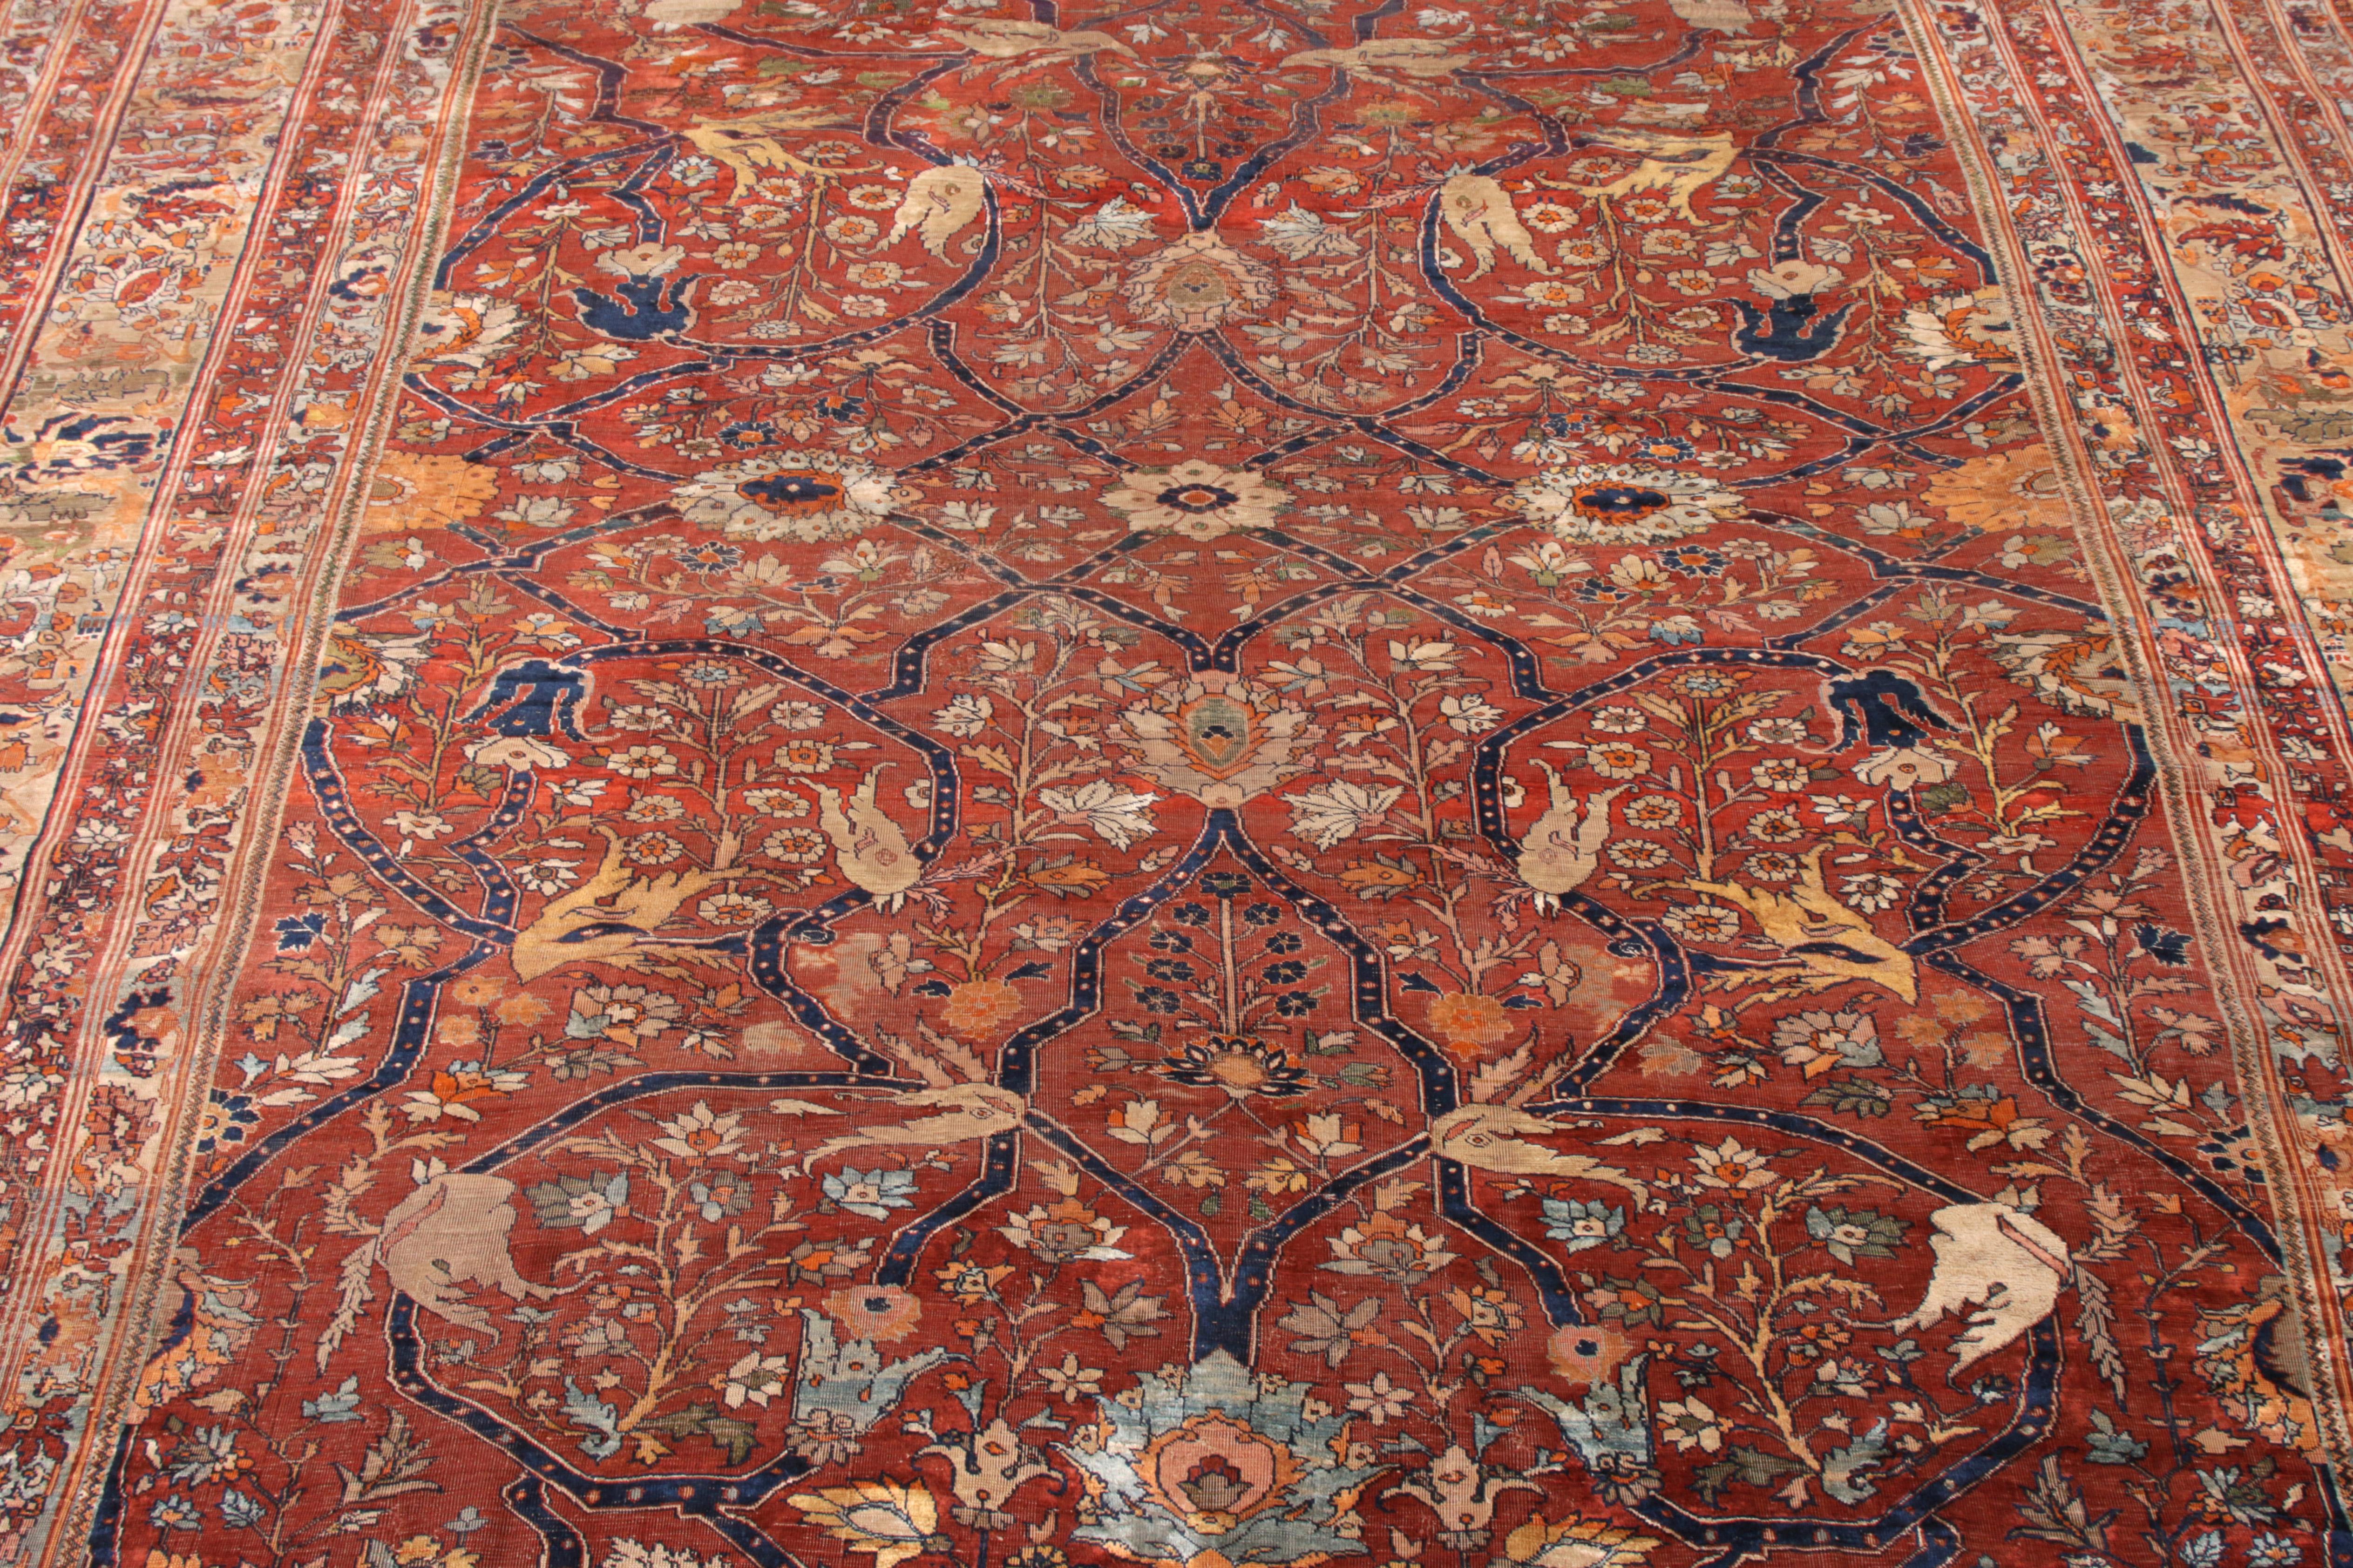 German Hand-Knotted Antique Heriz Persian Style Rug in Red Floral Pattern For Sale